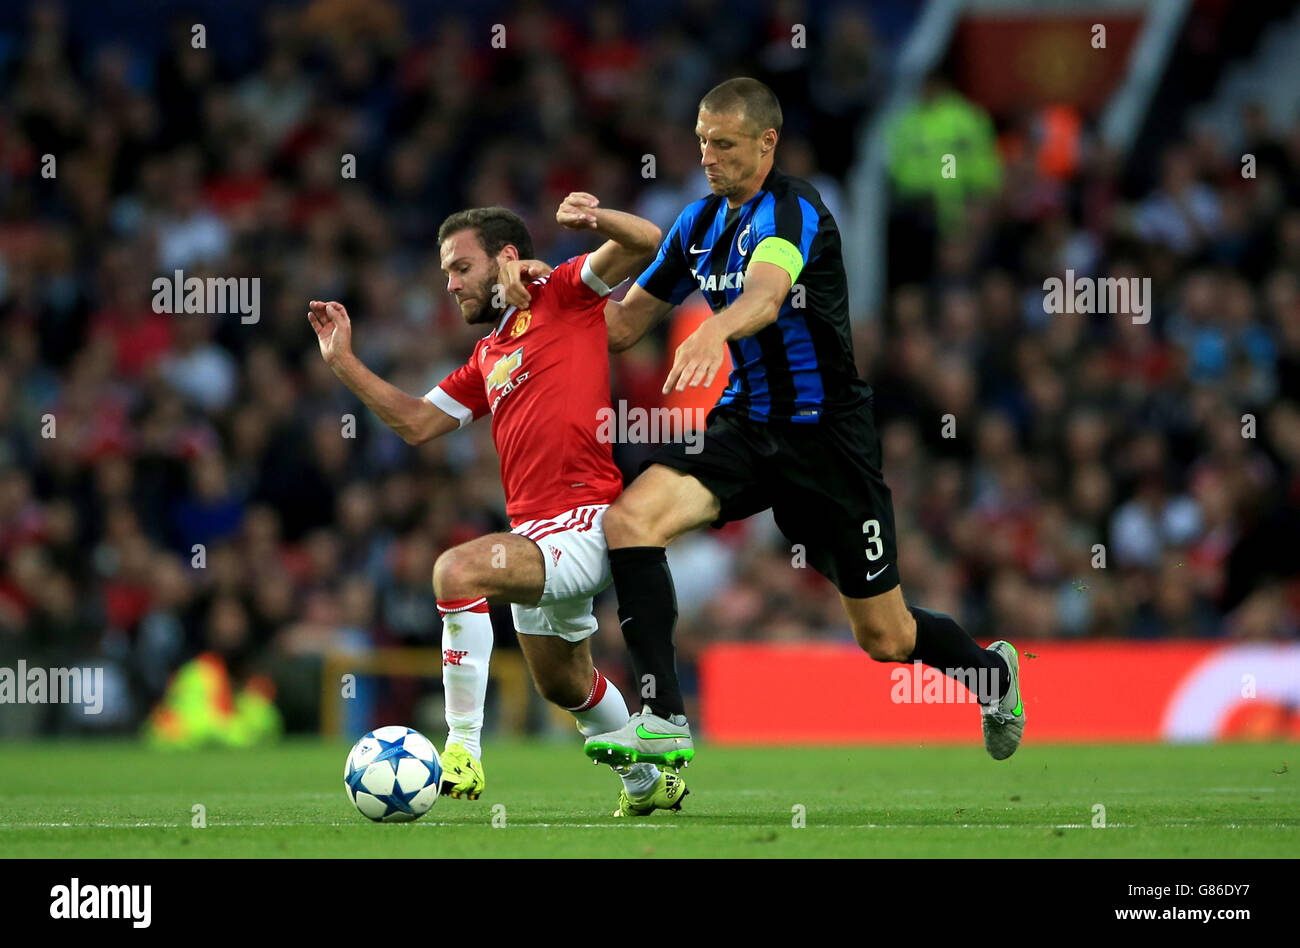 Club Brugge's Timmy Simons (right) and Manchester United's Juan Mata (left) battle for the ball during the UEFA Champions League Qualifying, Play-Off at Old Trafford, Manchester. Stock Photo